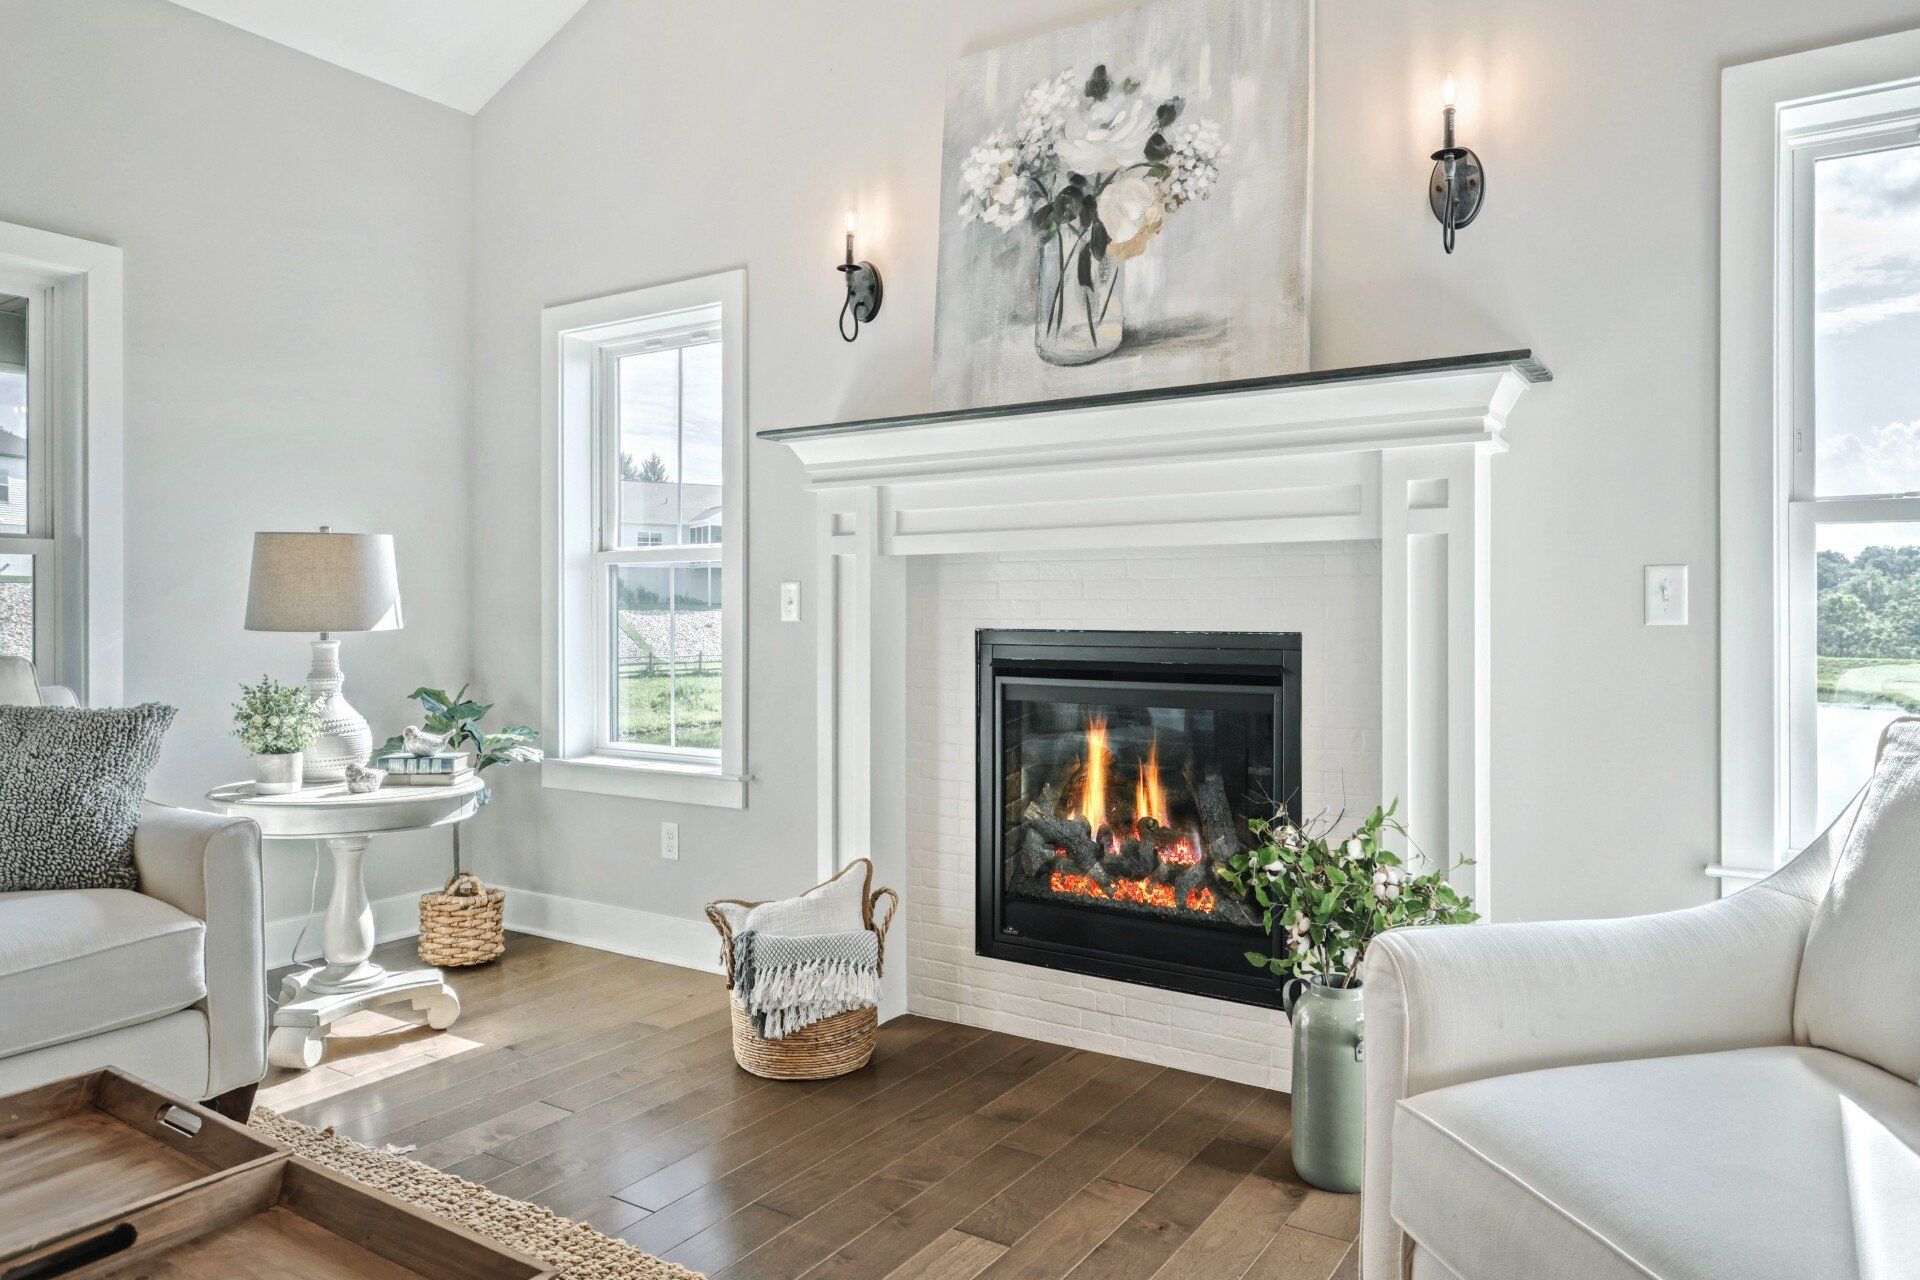 Northfield transitional fireplace in Crossings at Sweetbriar 55+ community